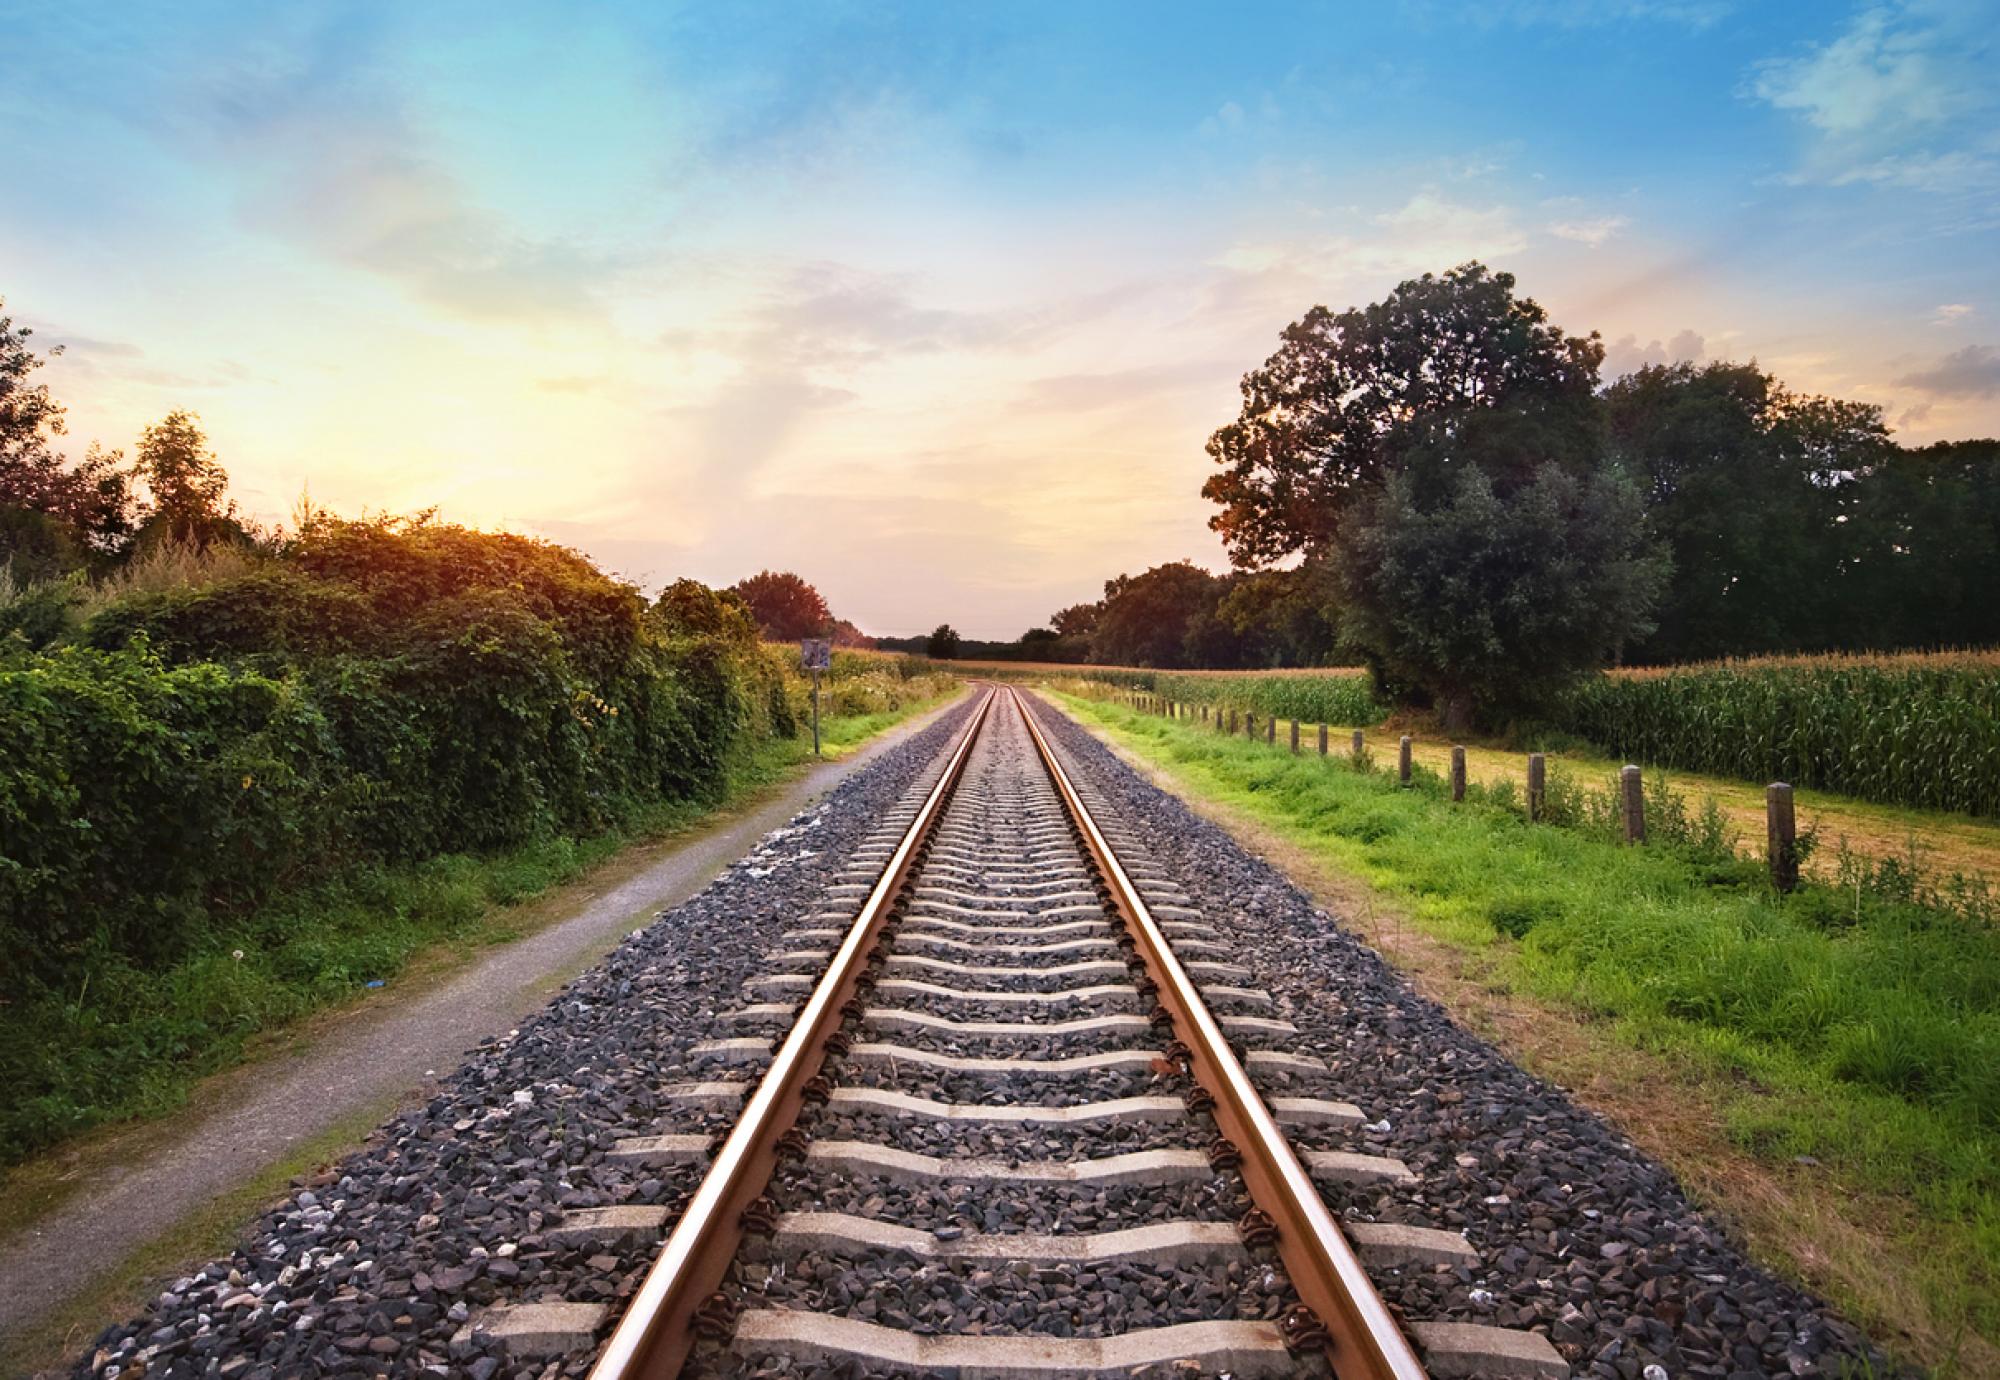 railway tracks in a rural scene with nice pastel sunset, via Istock 